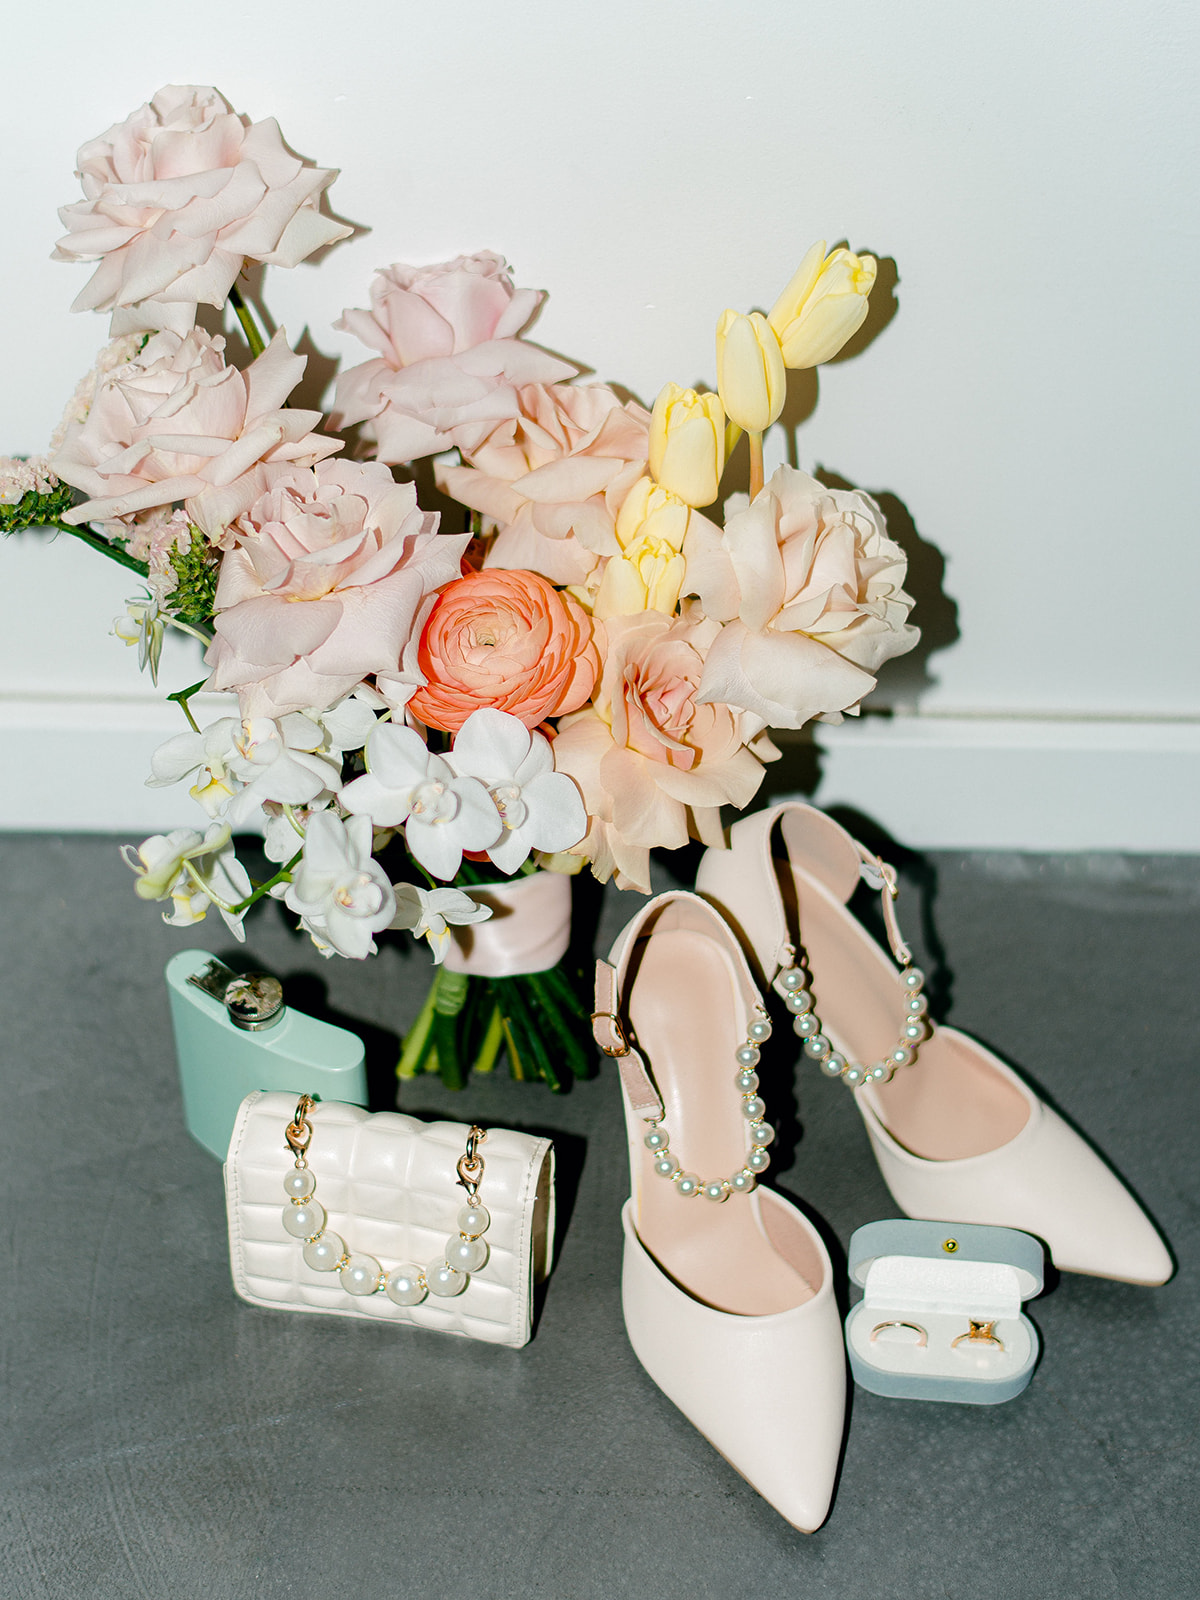 Colourful bridal bouquet captured in detailed photo alongside blue velvet ring box, tiffany blue flask and mini quilted bridal purse, studio wedding venue ideas, feminine bridal accessories